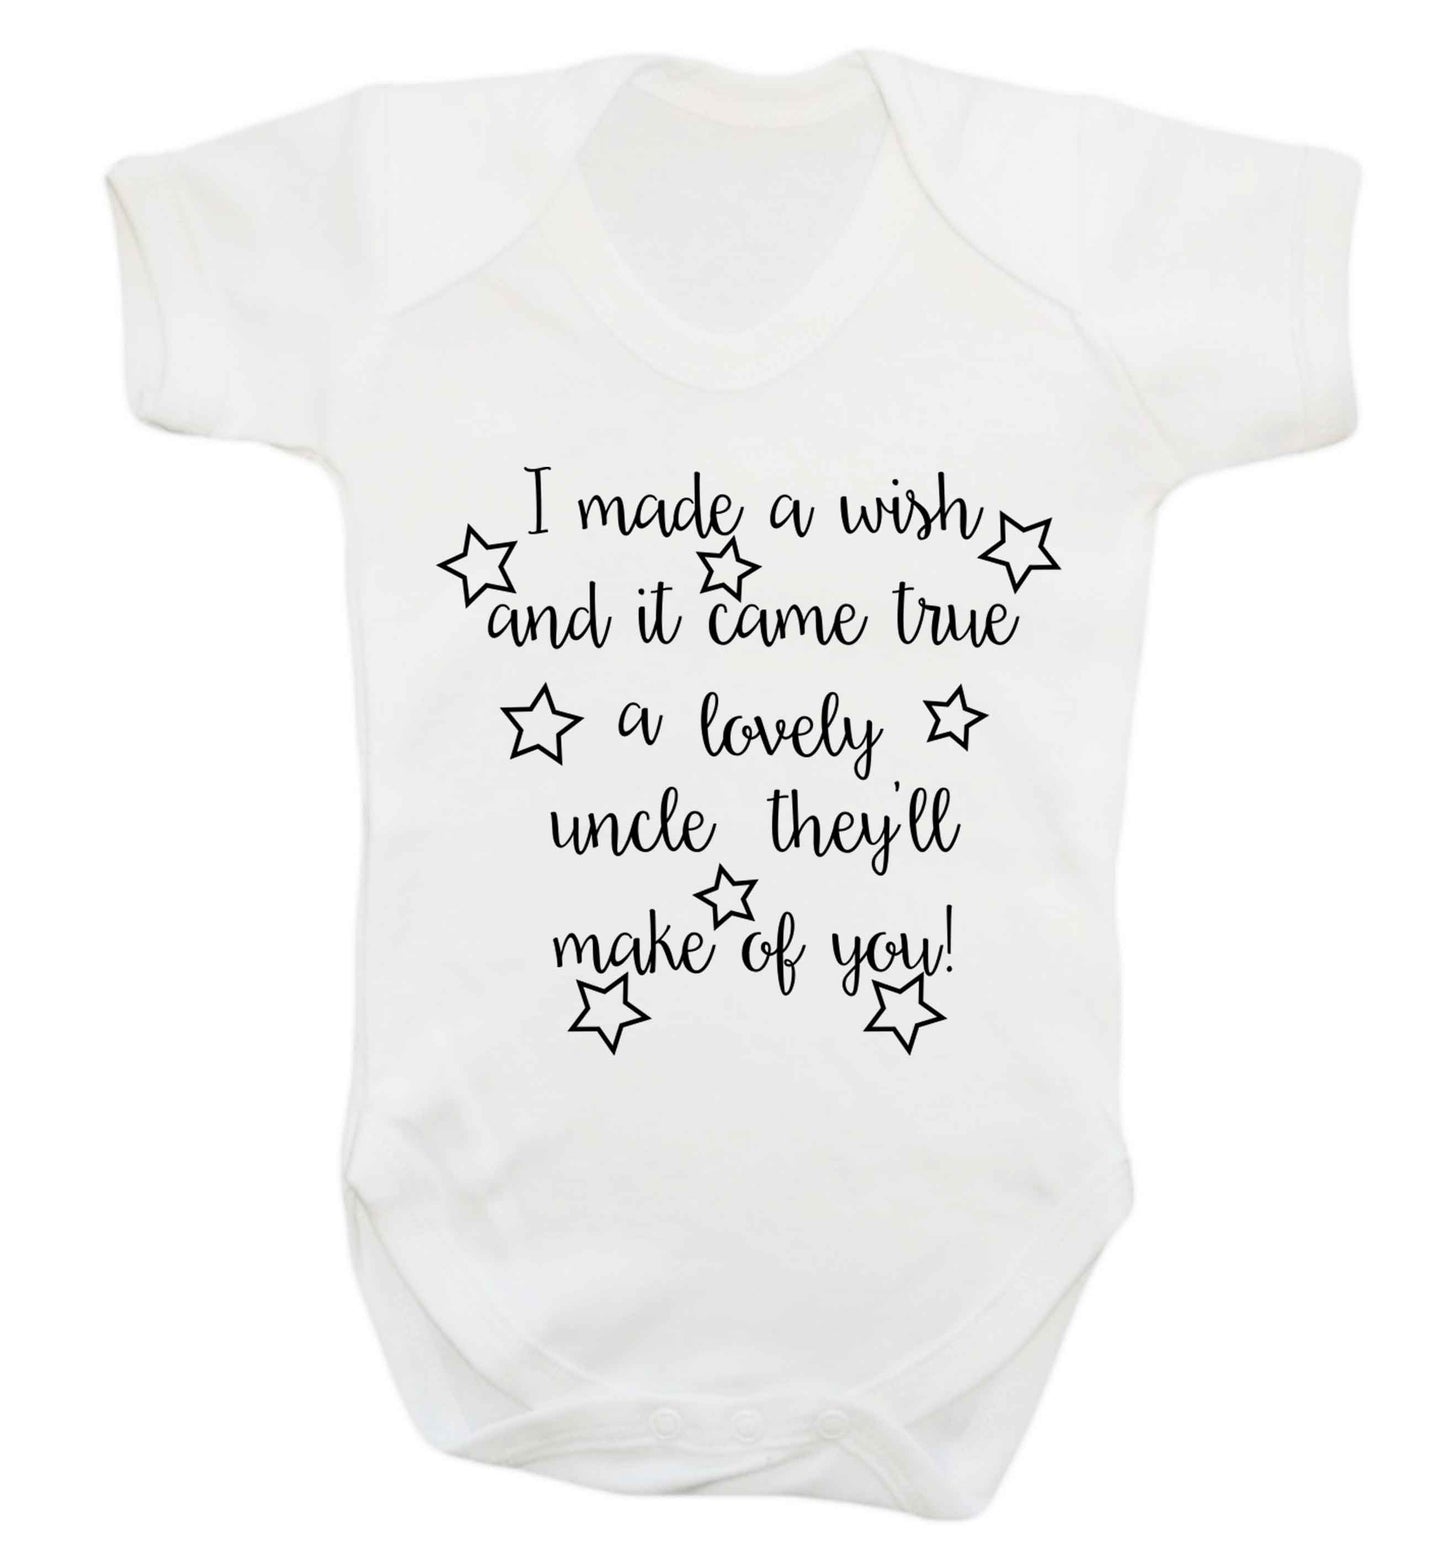 I made a wish and it came true a lovely uncle they'll make of you! Baby Vest white 18-24 months